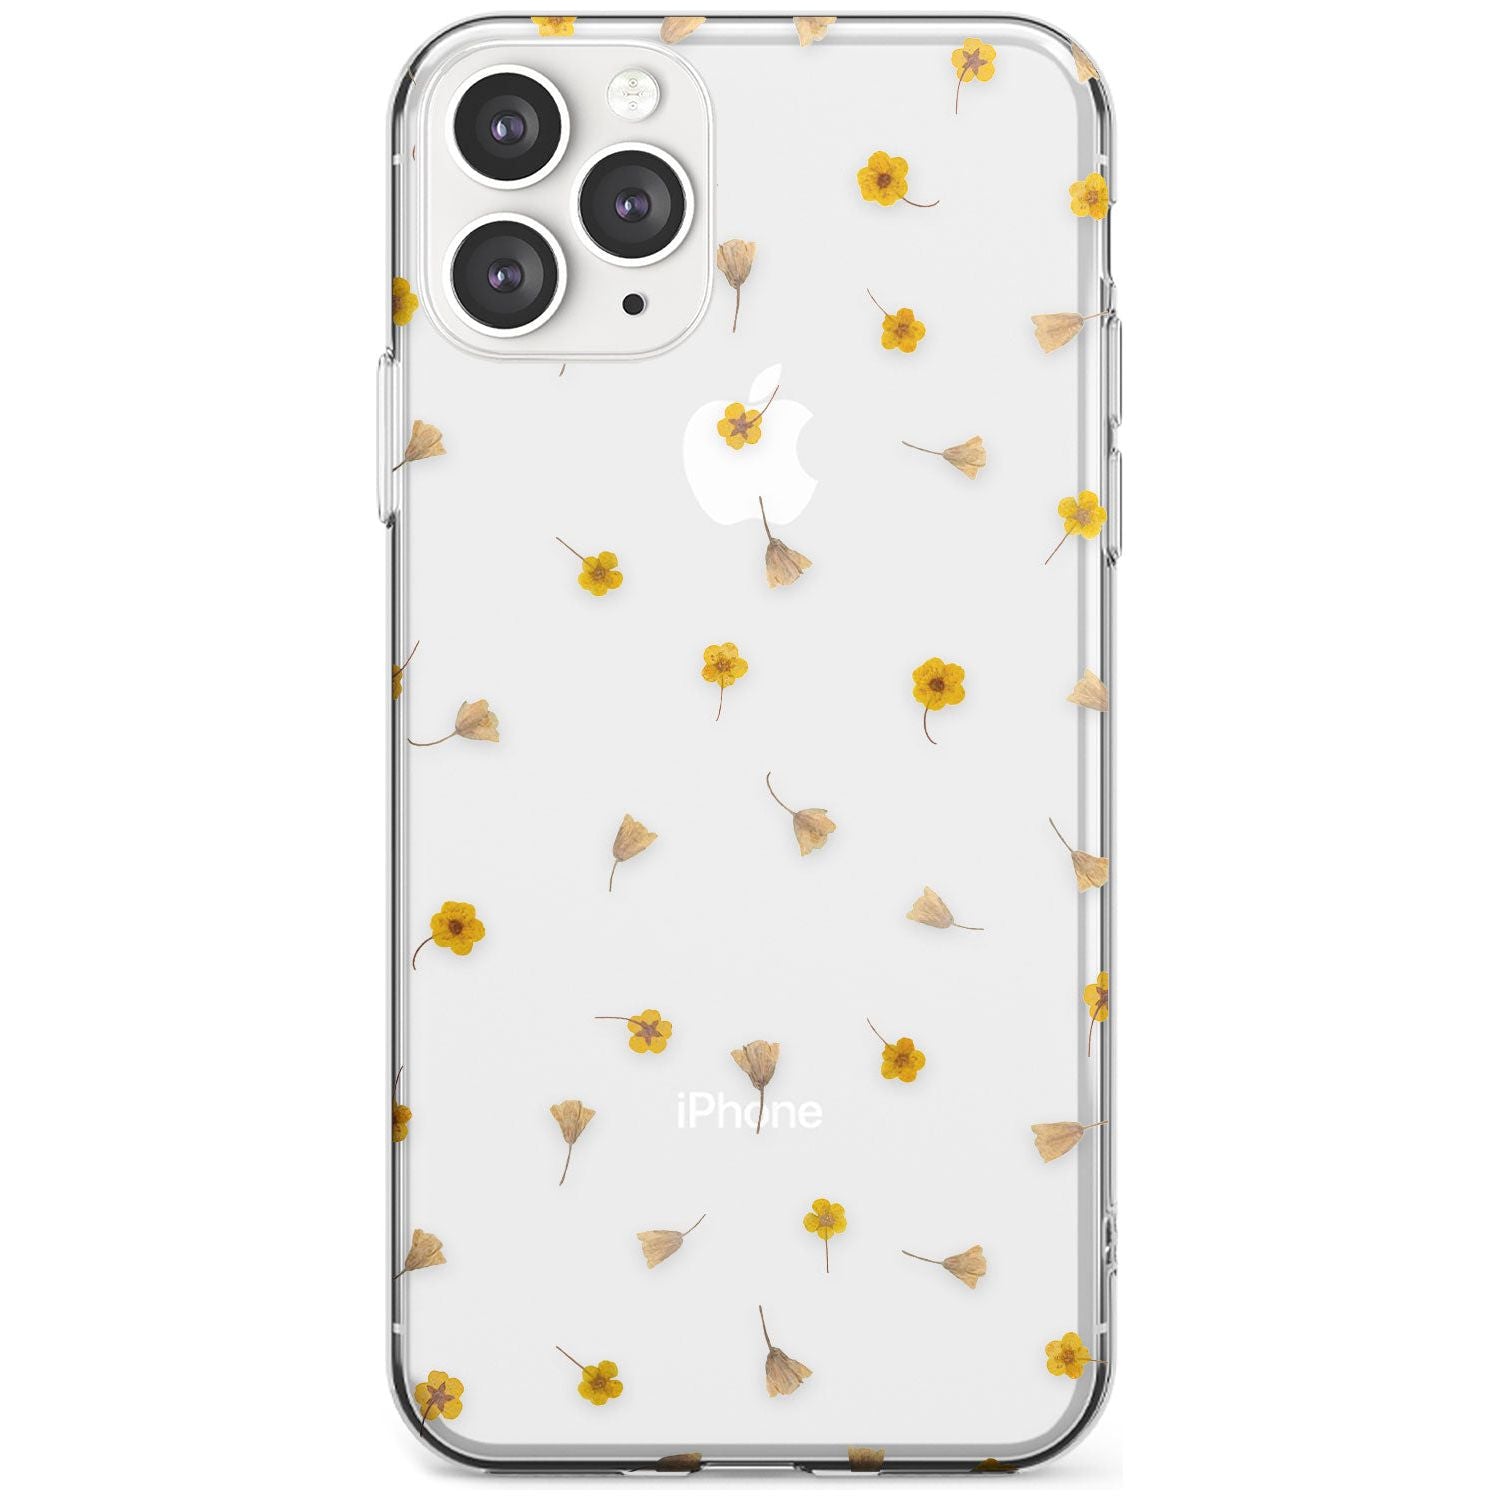 Small Flower Mix - Dried Flower-Inspired Design Slim TPU Phone Case for iPhone 11 Pro Max